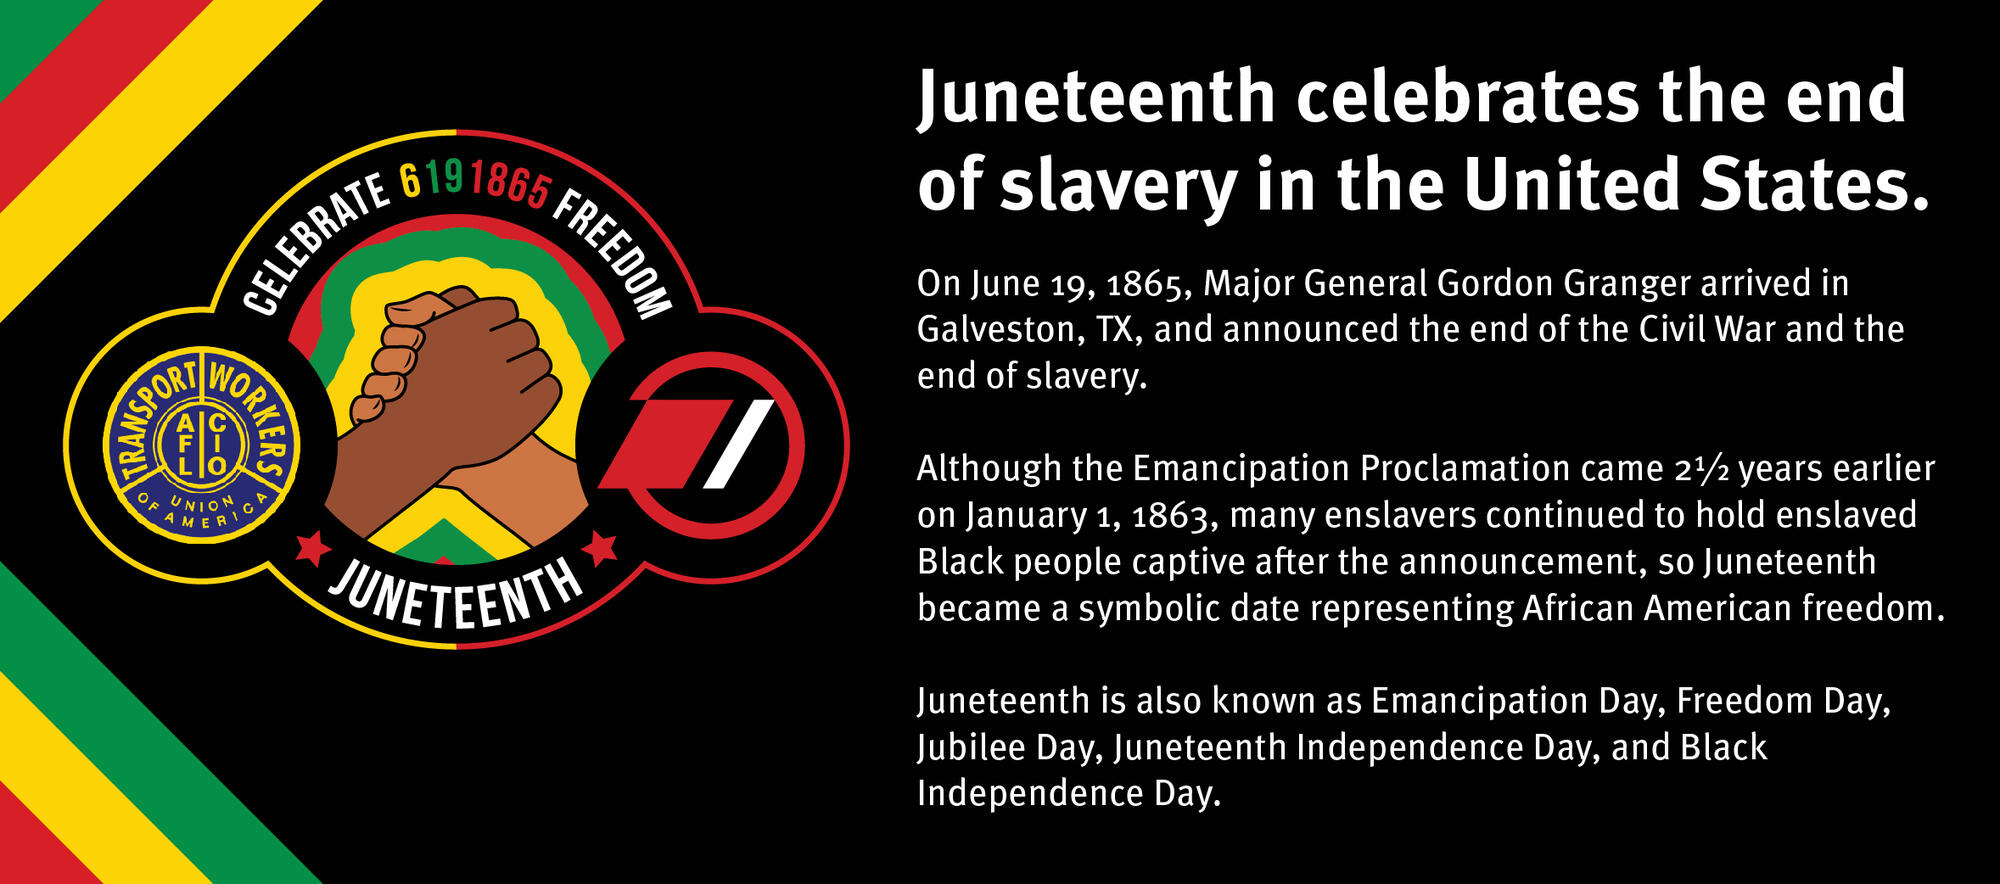 Juneteenth celebrates the end of slavery in the United States